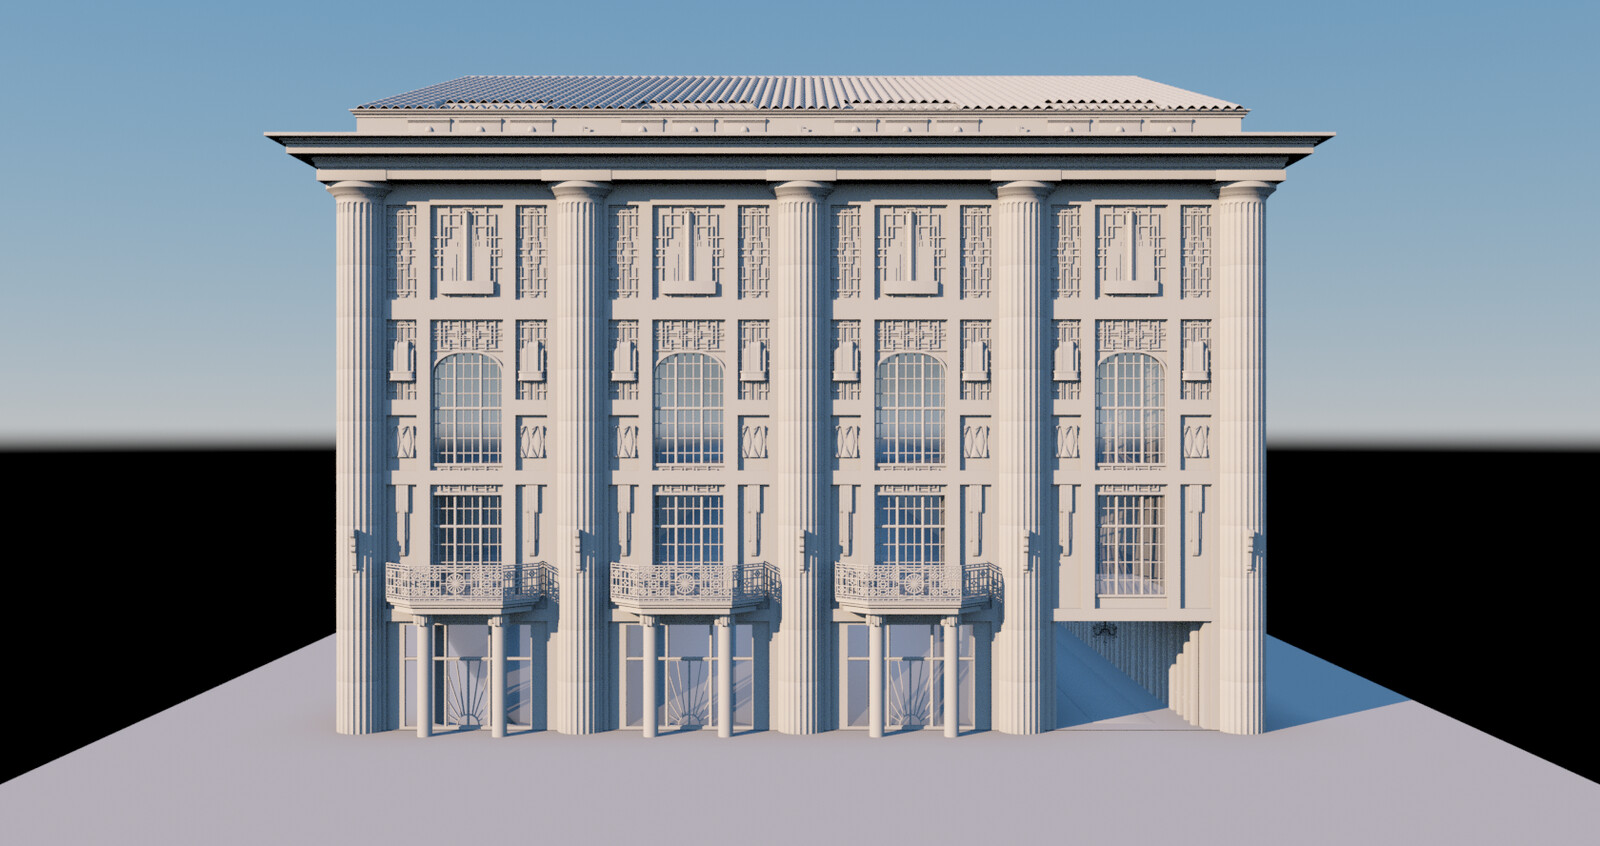 Stages of the Admiralspalast I build in 3D for the project.